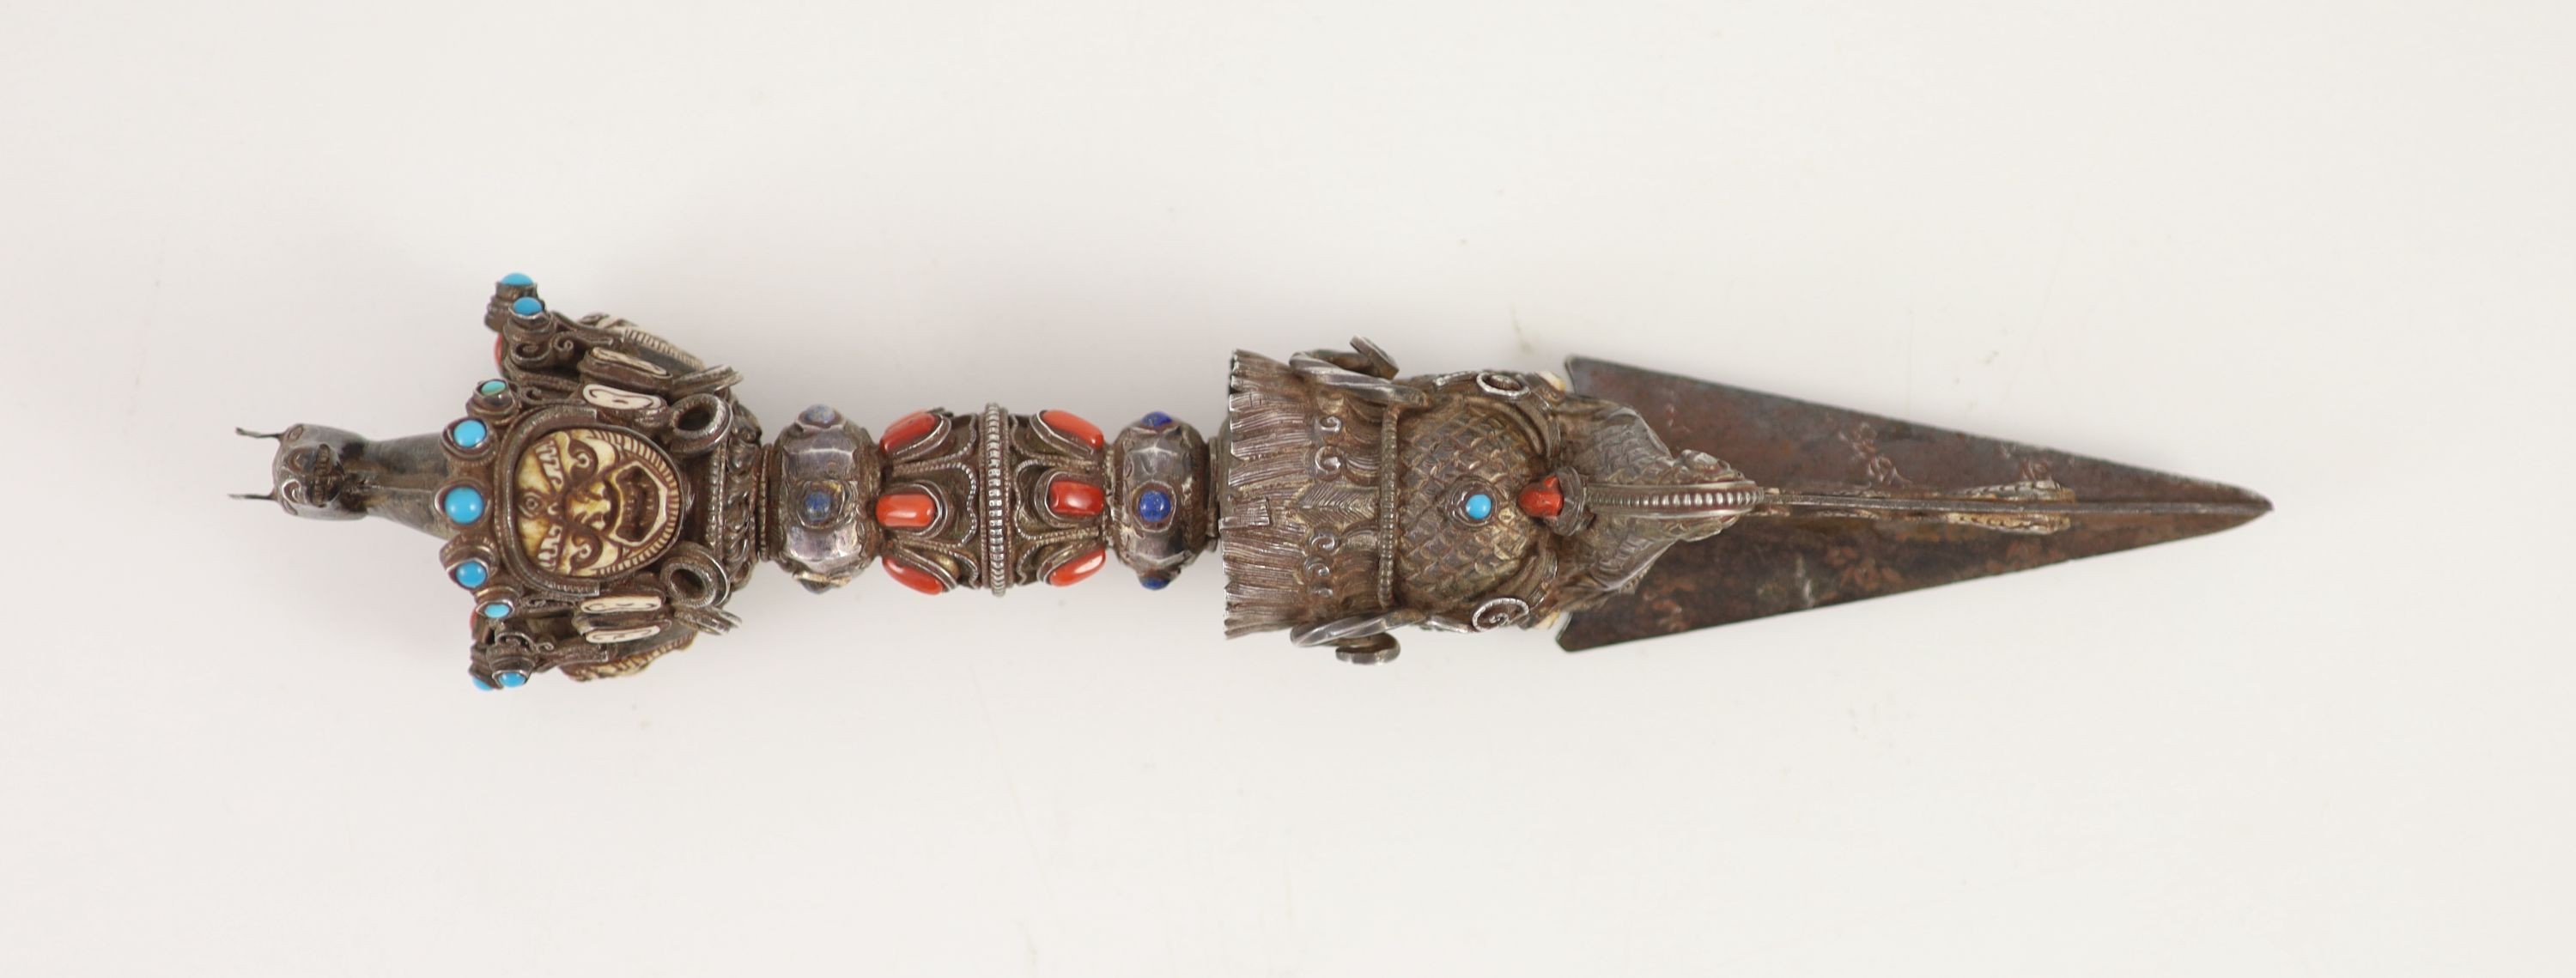 A Tibetan silver, bone and gem set phurbu (ritual dagger), 19th/20th century, 27.5 cm long, some of the stones replaced with glass